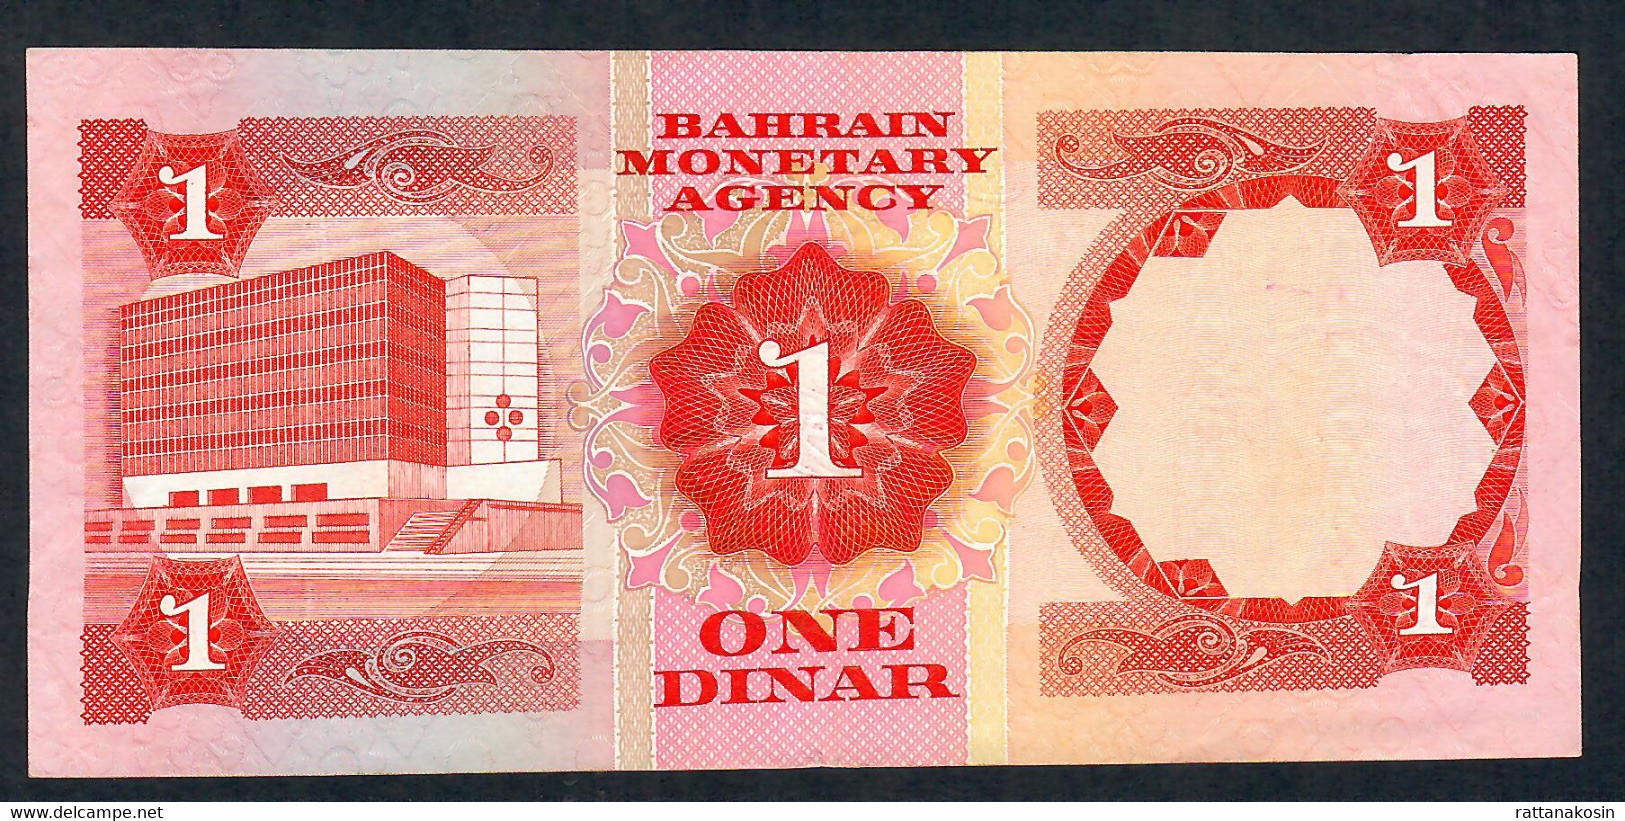 BAHRAIN P8 1 DINAR DATED 1973 ISSUED IN 1979   XF - Bahrein